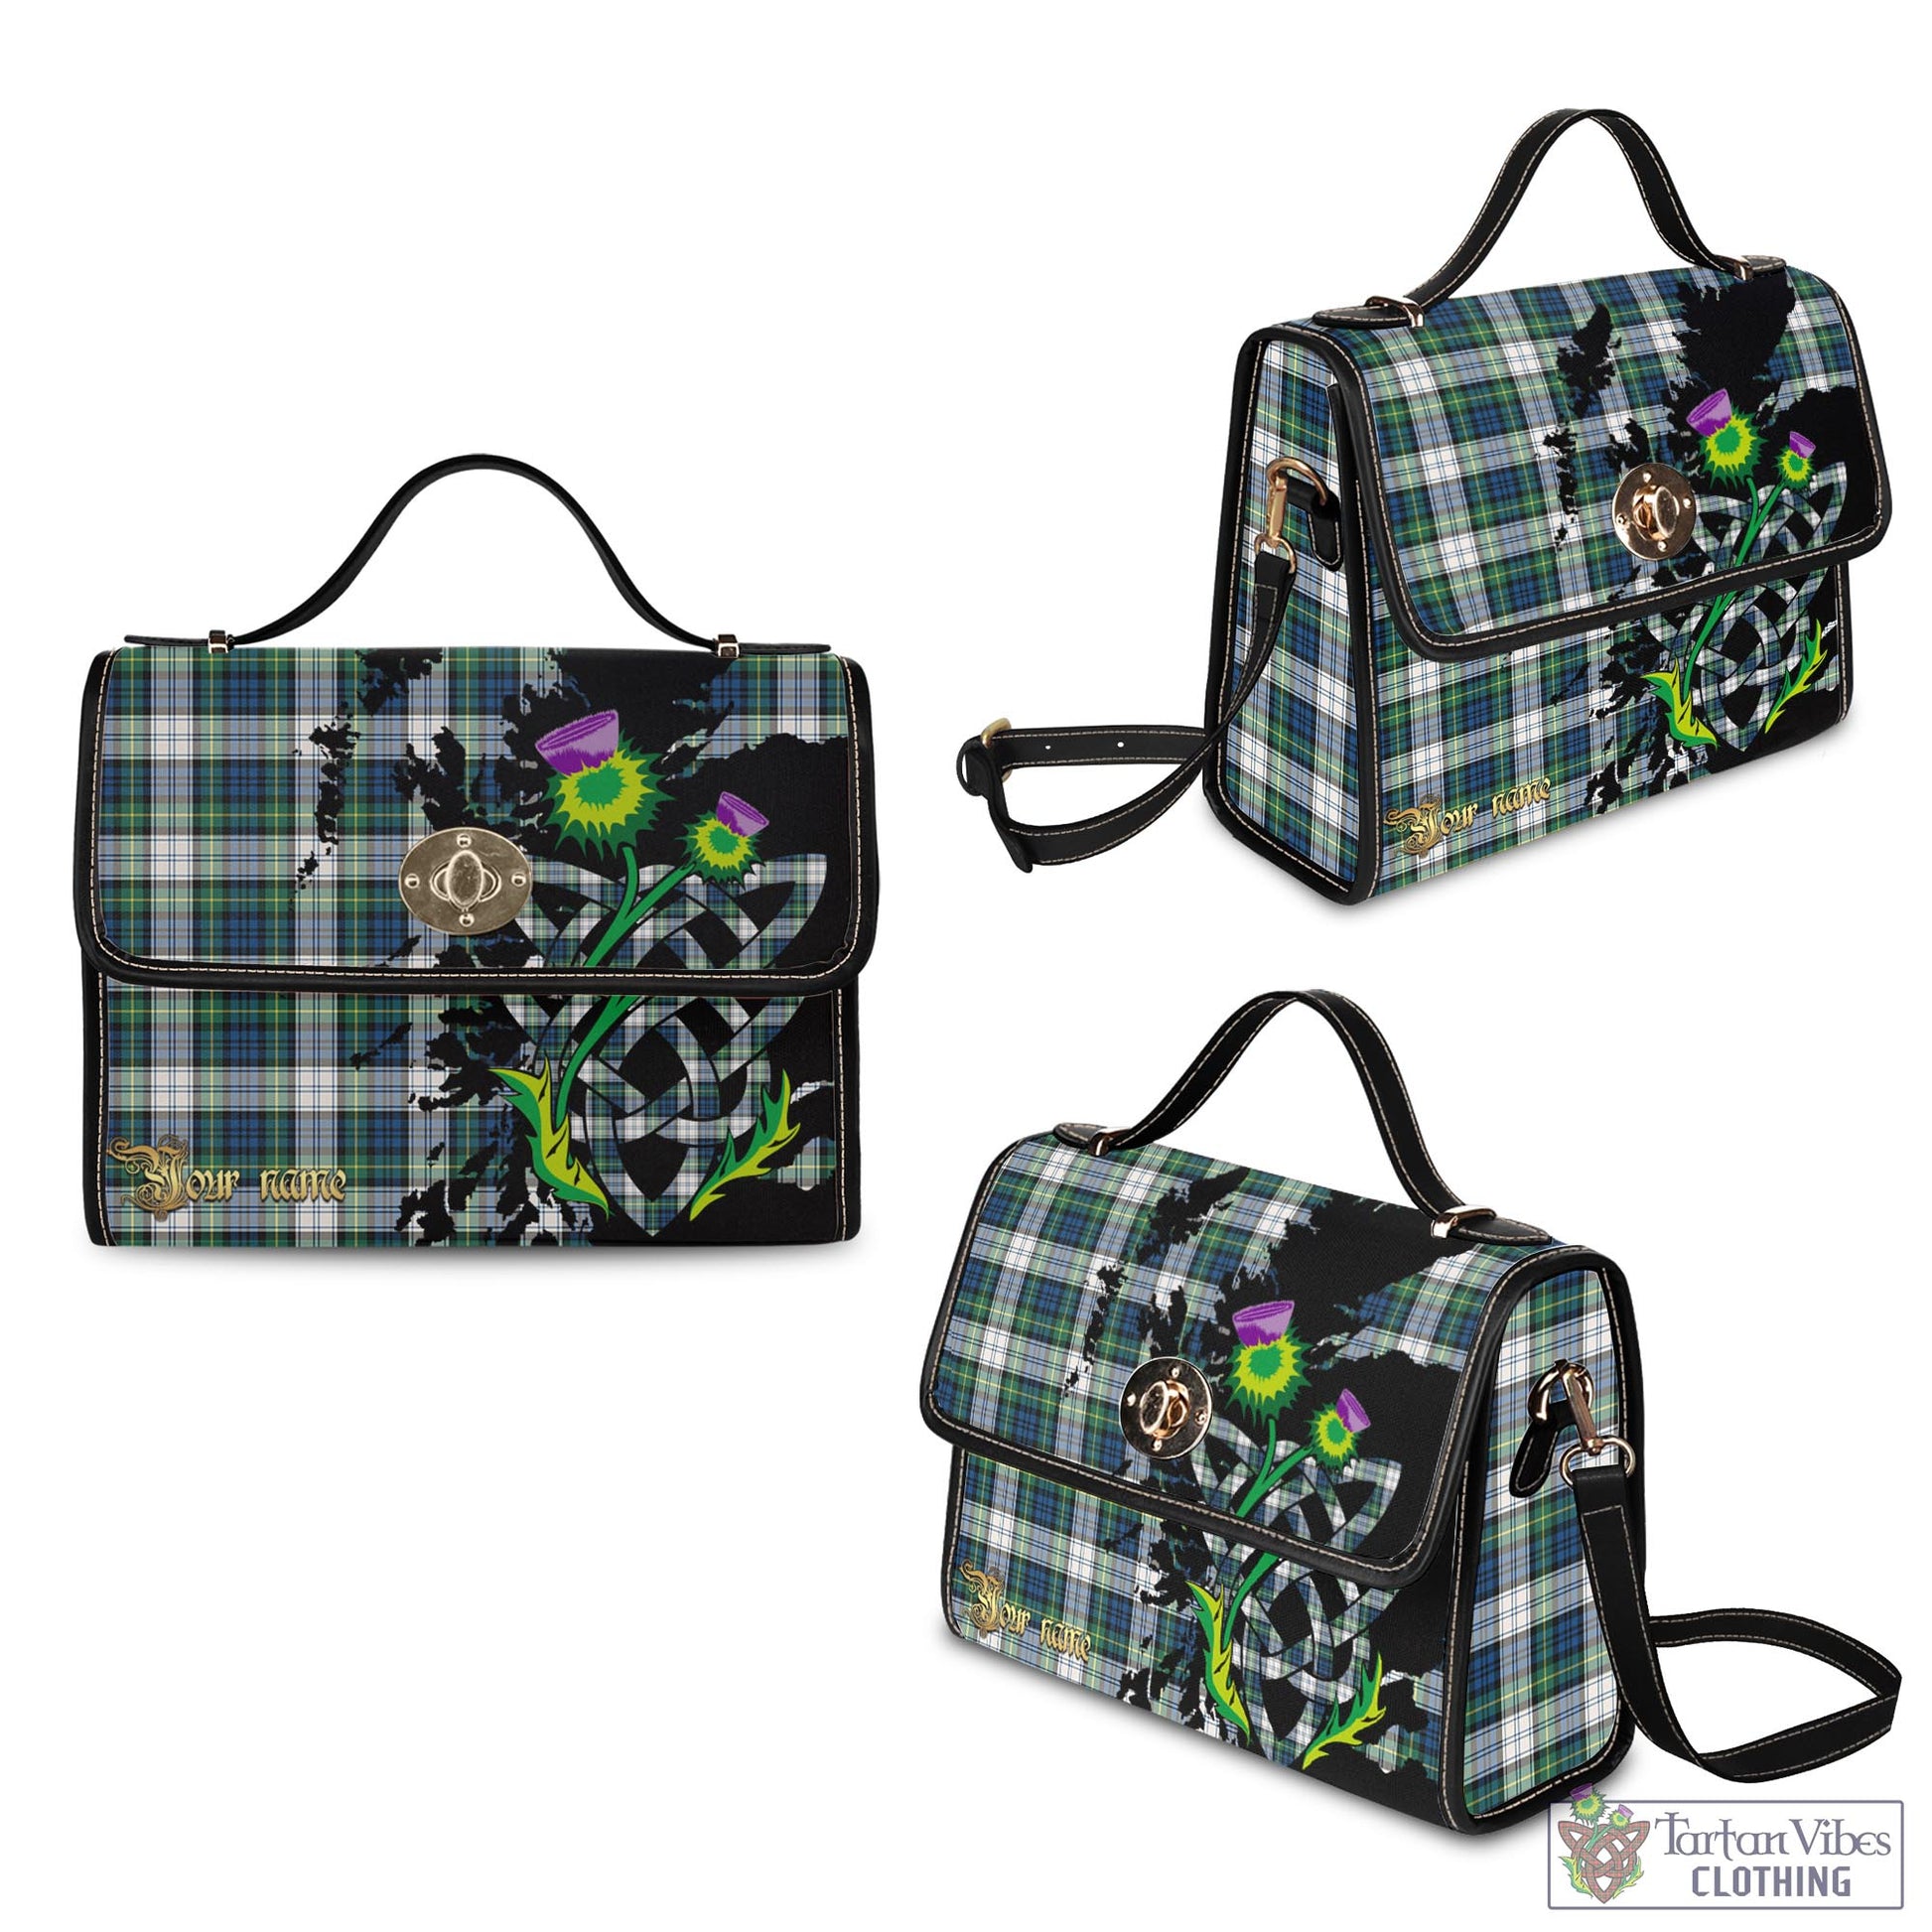 Tartan Vibes Clothing Gordon Dress Ancient Tartan Waterproof Canvas Bag with Scotland Map and Thistle Celtic Accents